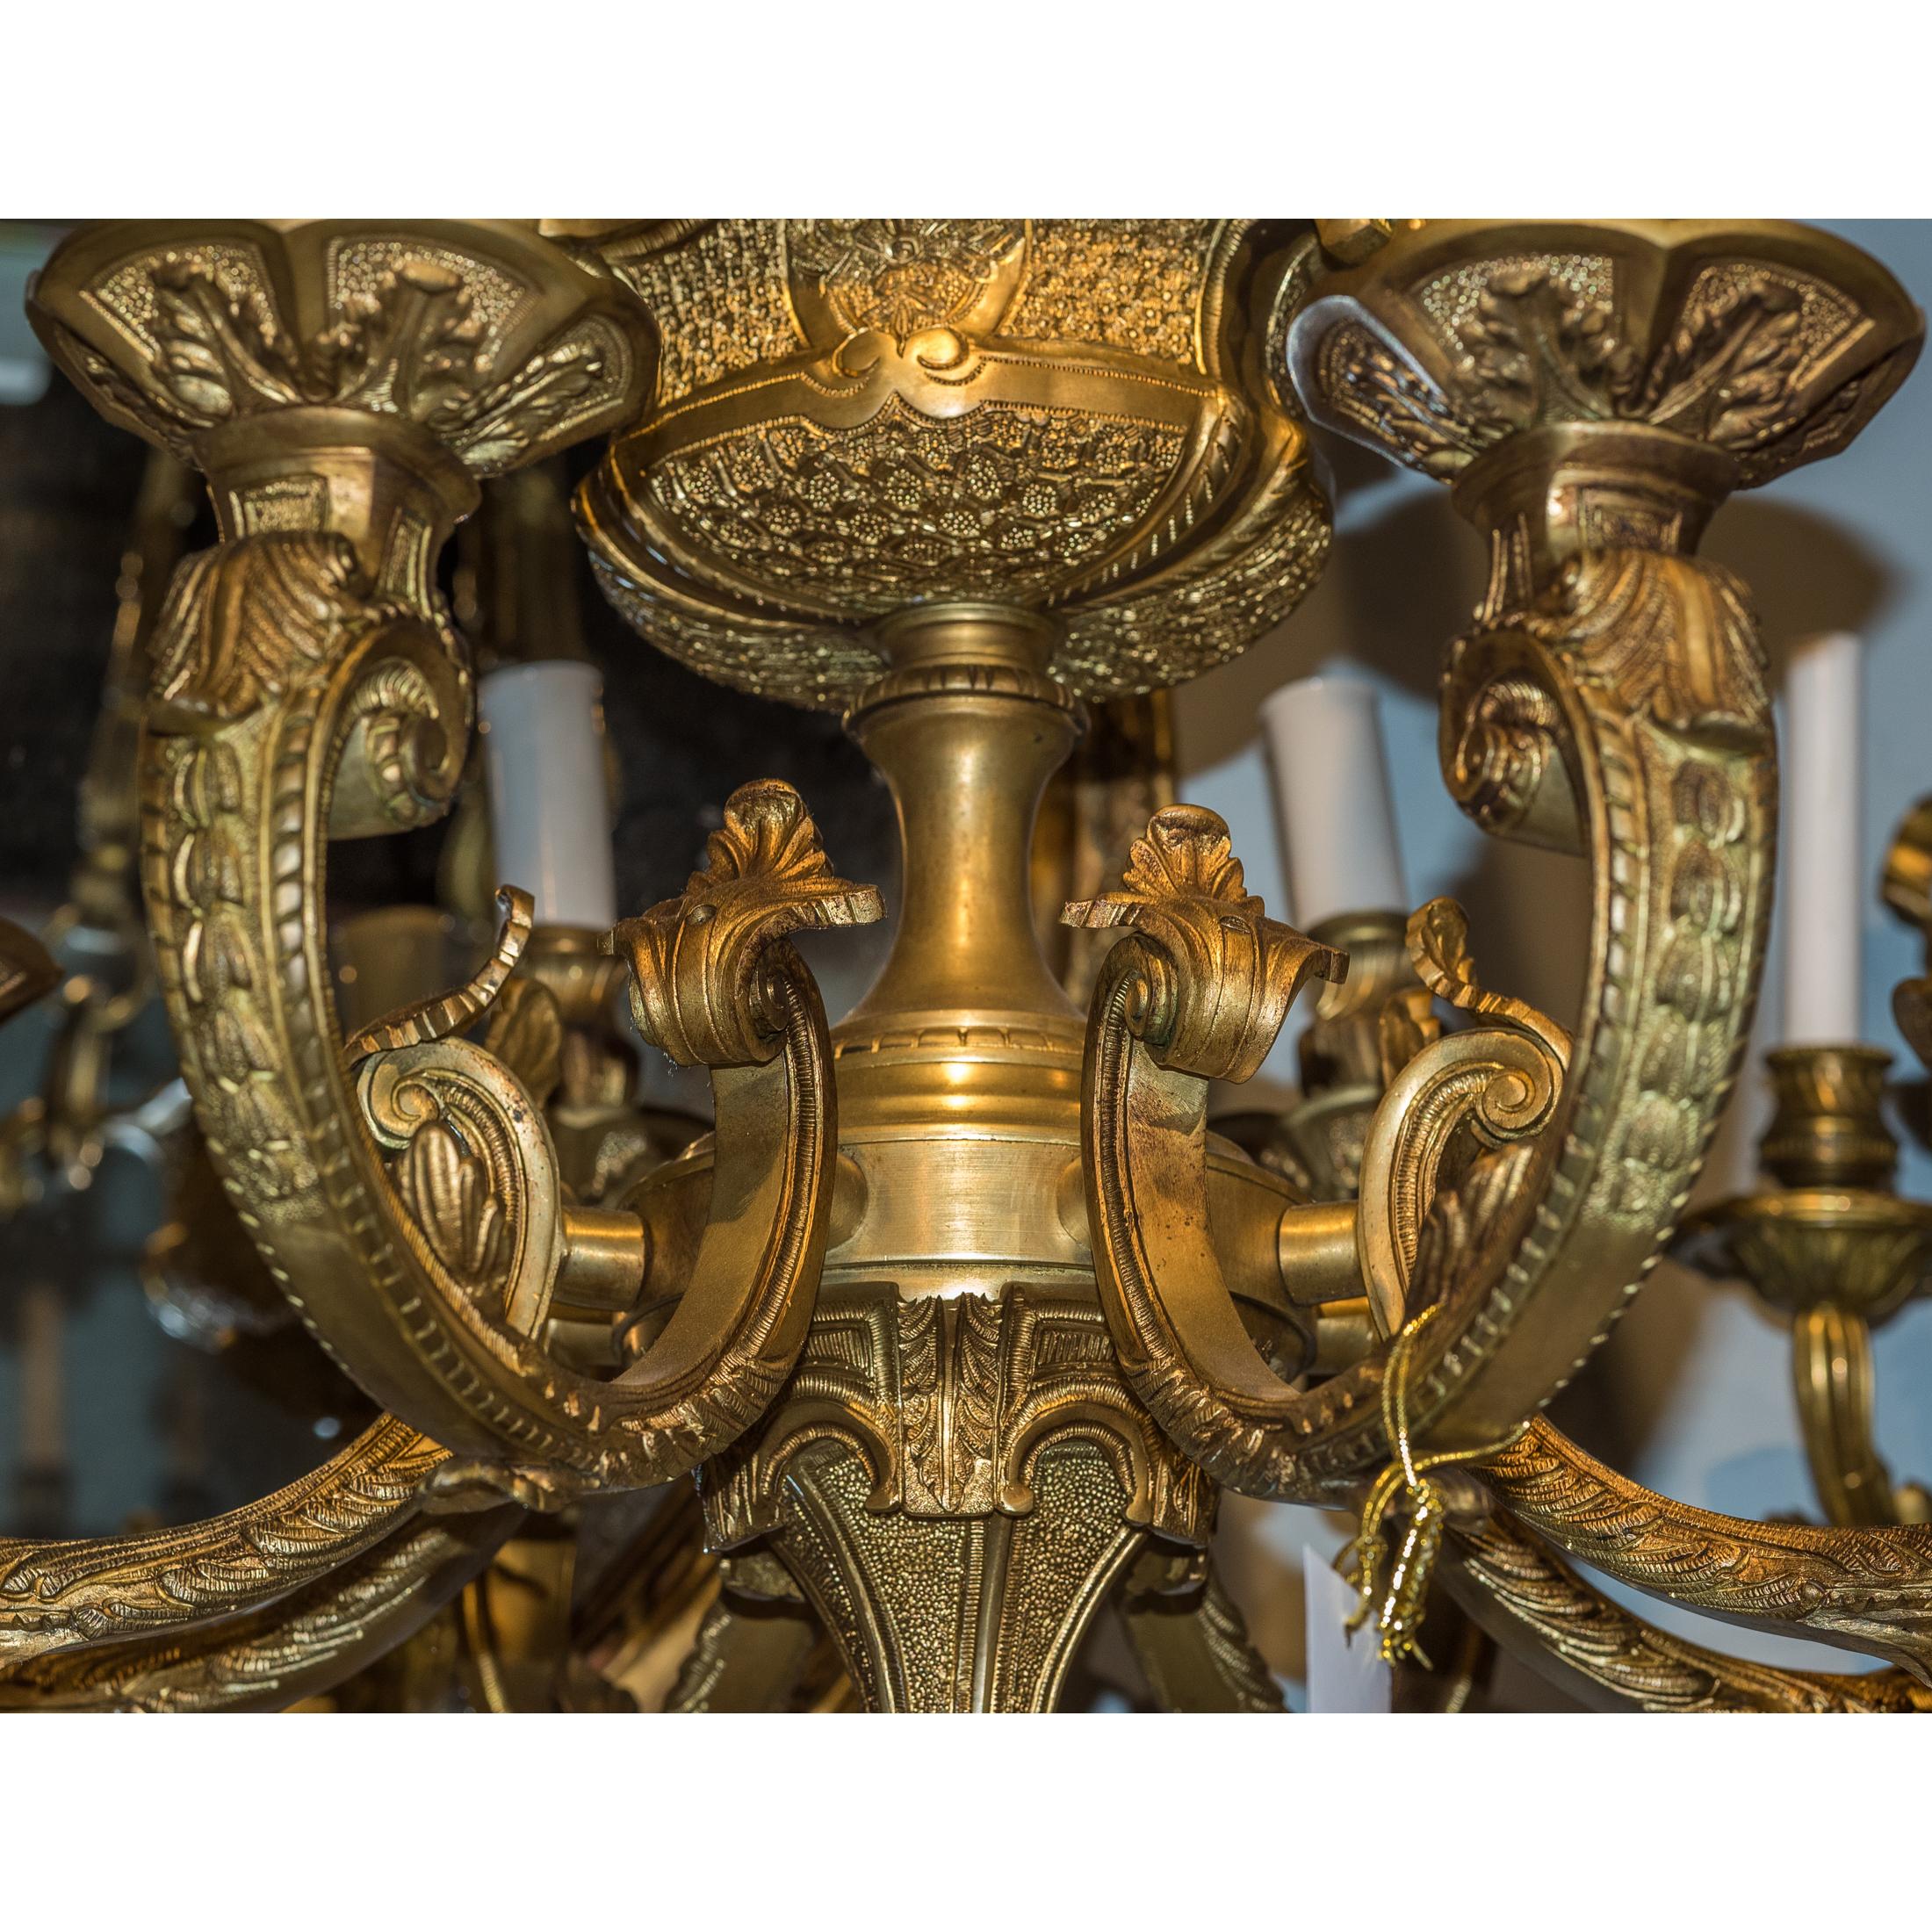 About
A fine quality and elegant French ormolu Regence-style eight-light chandelier 

Date: 19th century
Origin: French
Size: 41 x 29 inches.